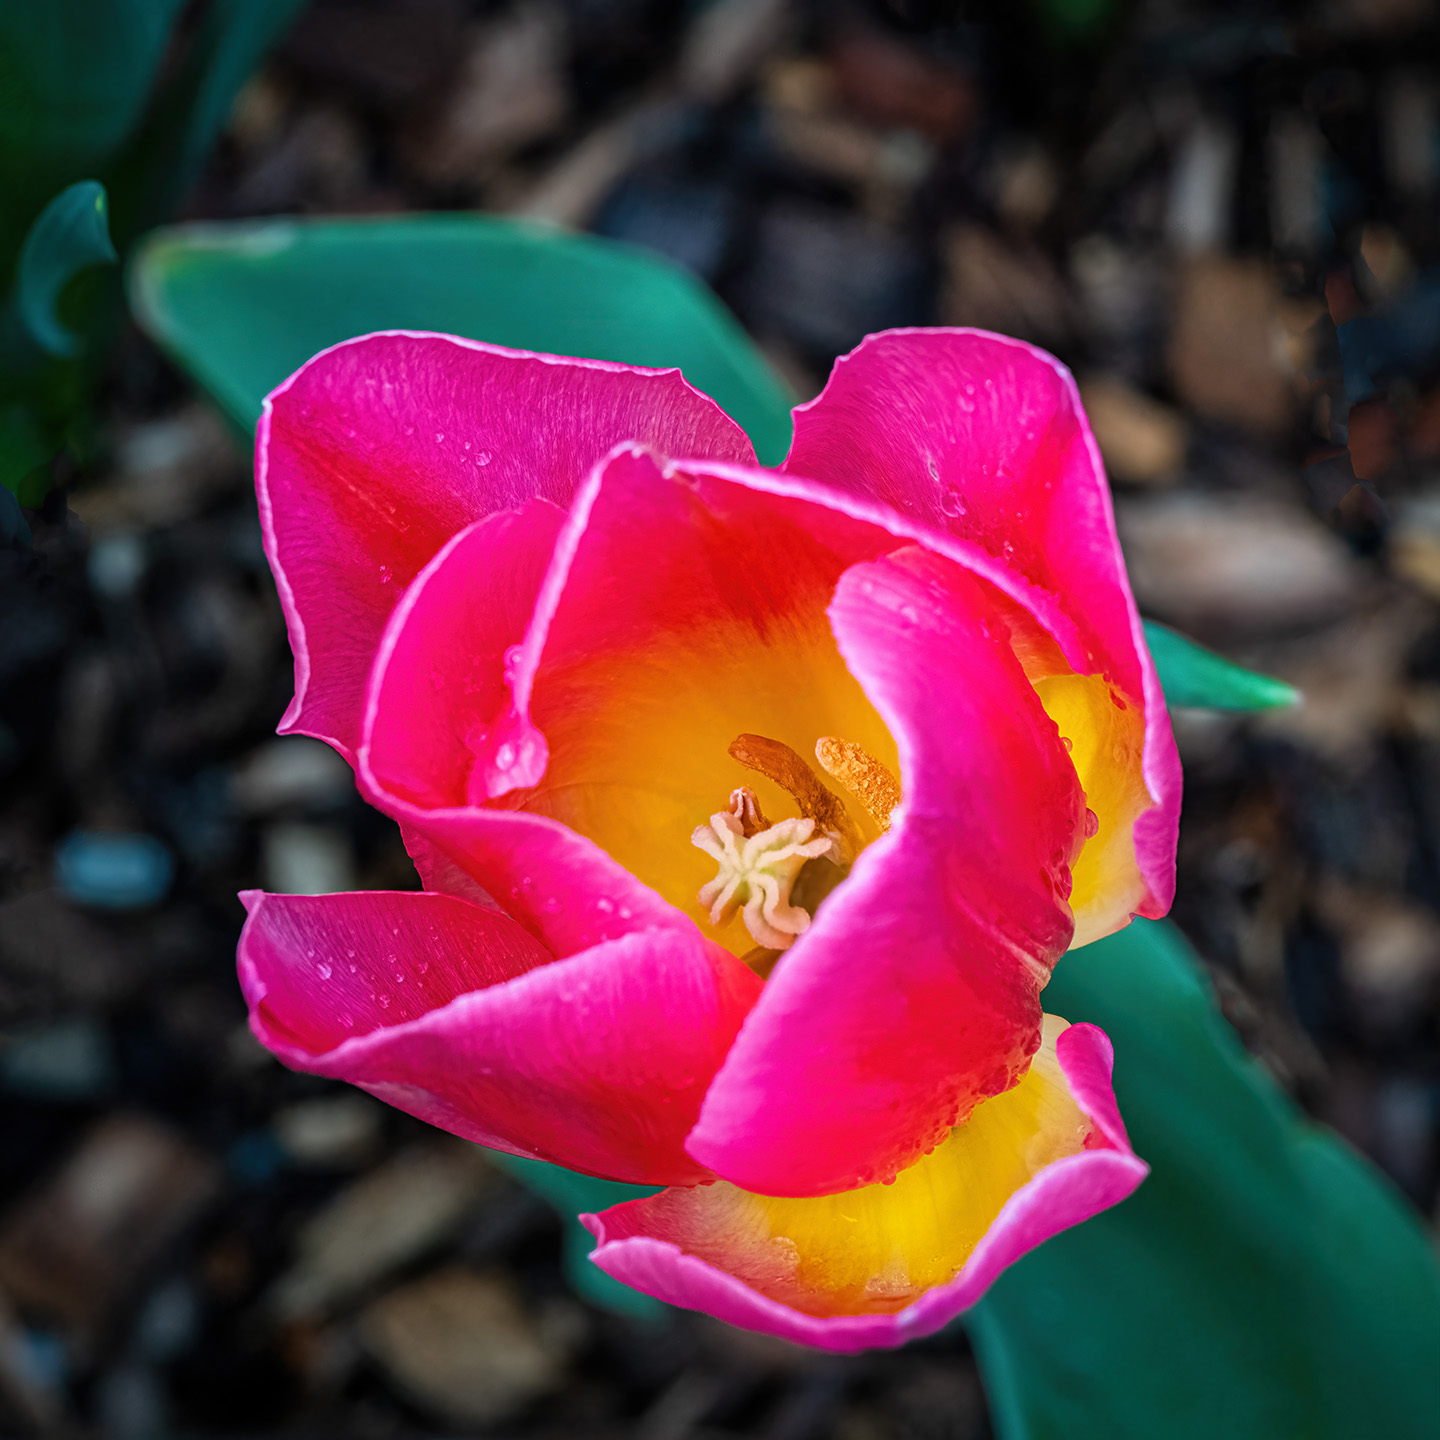 Solitary Tulip in Bloom